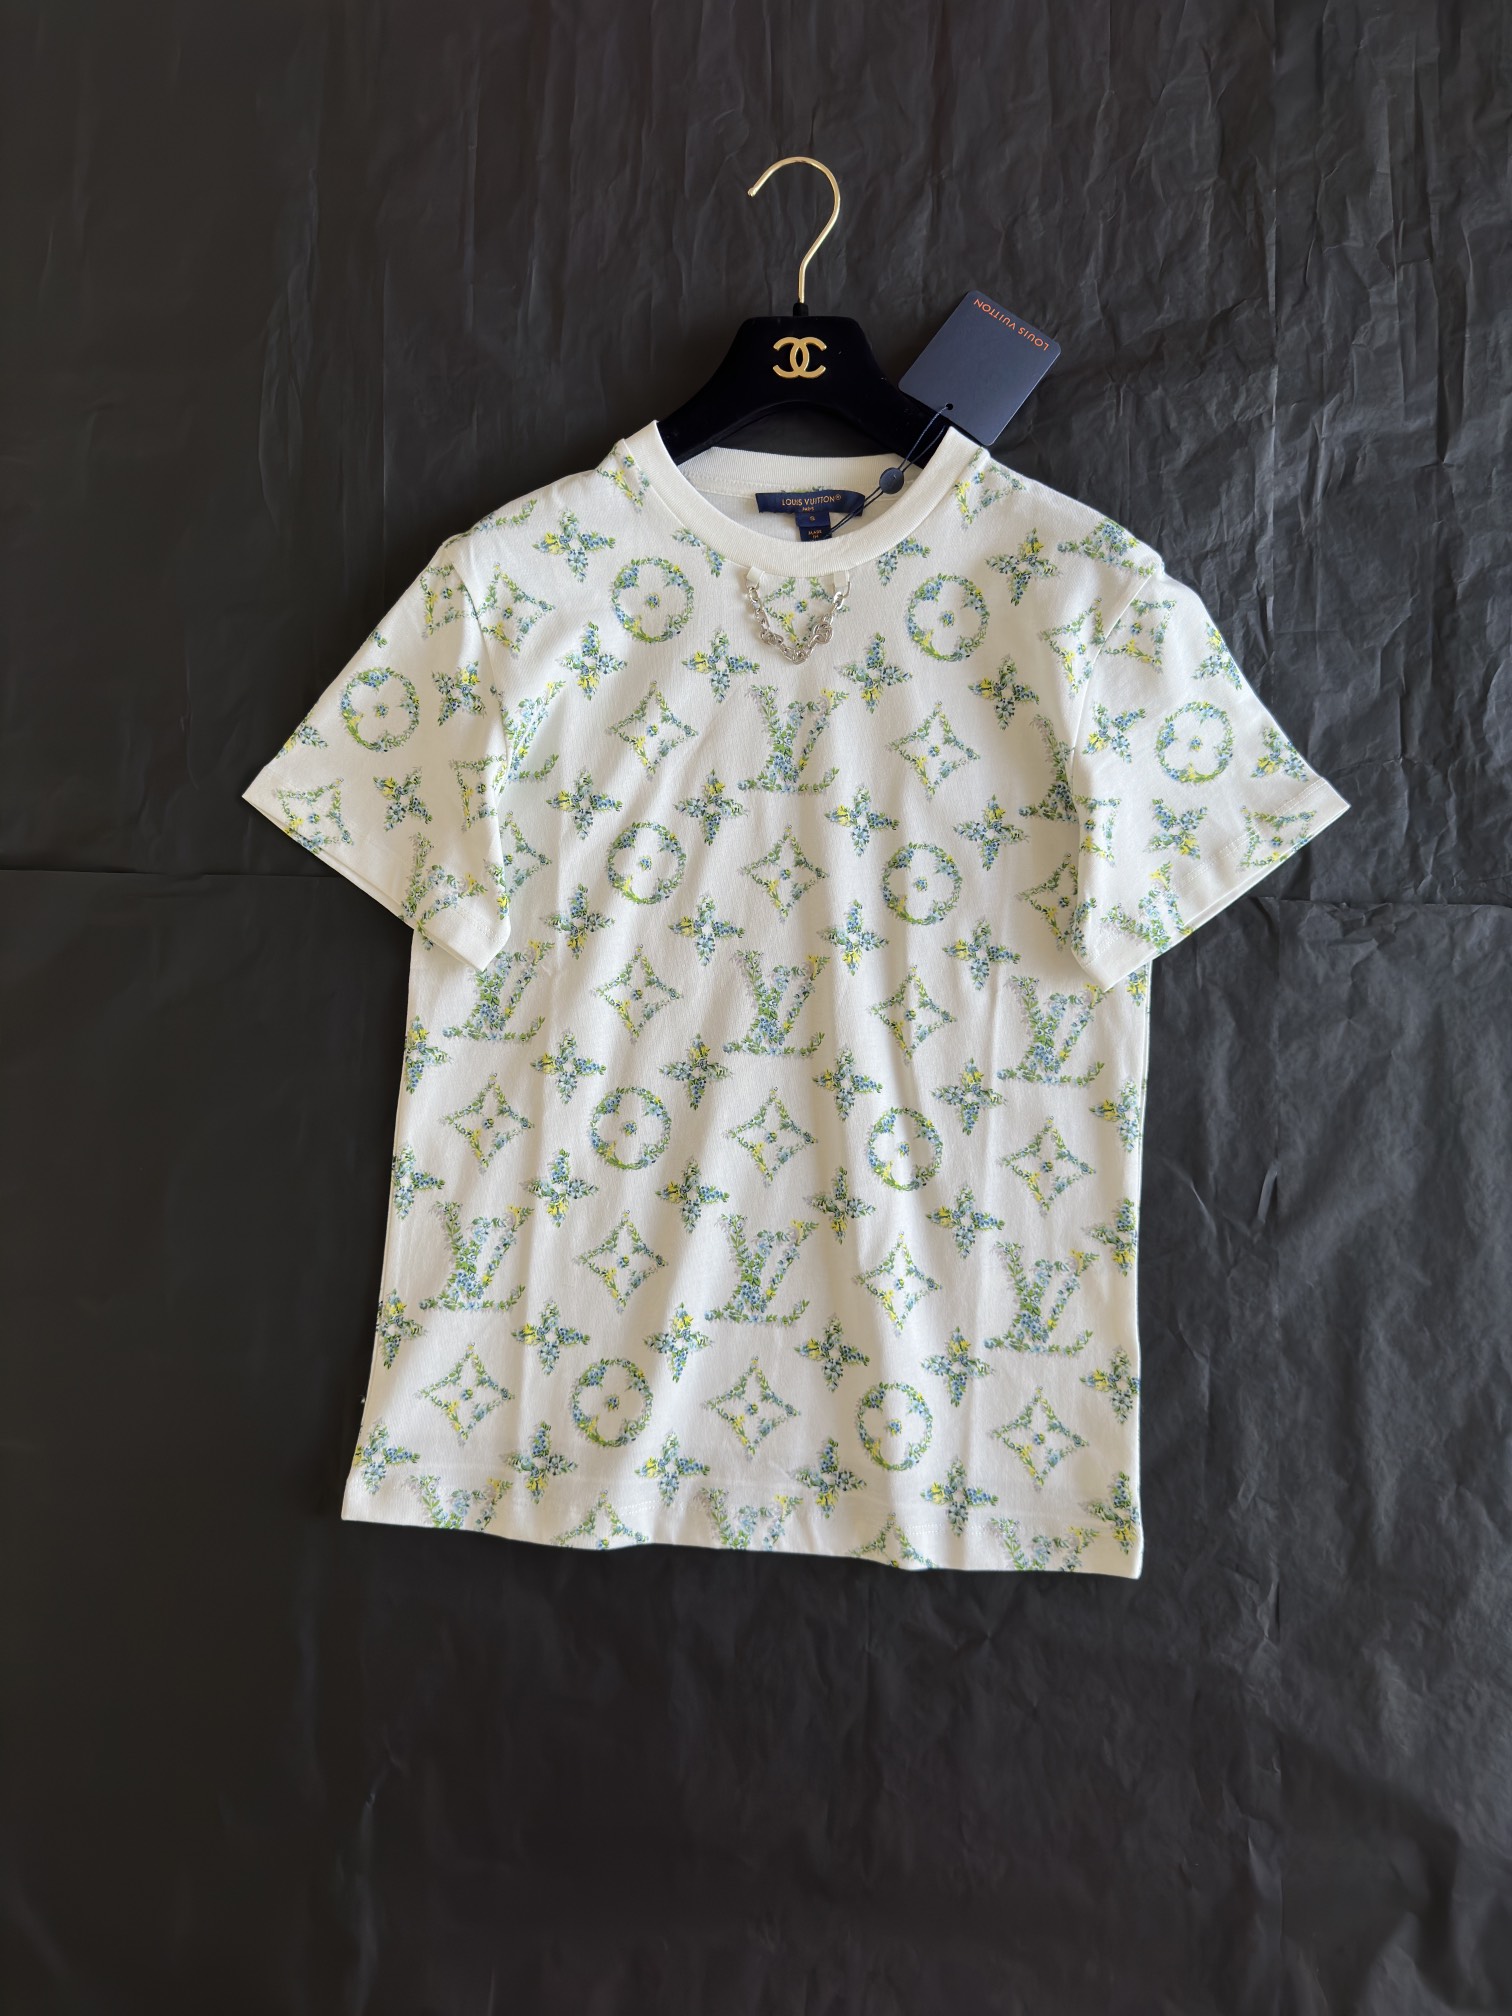 Louis Vuitton Clothing T-Shirt Printing Cotton Knitting Spring Collection Short Sleeve